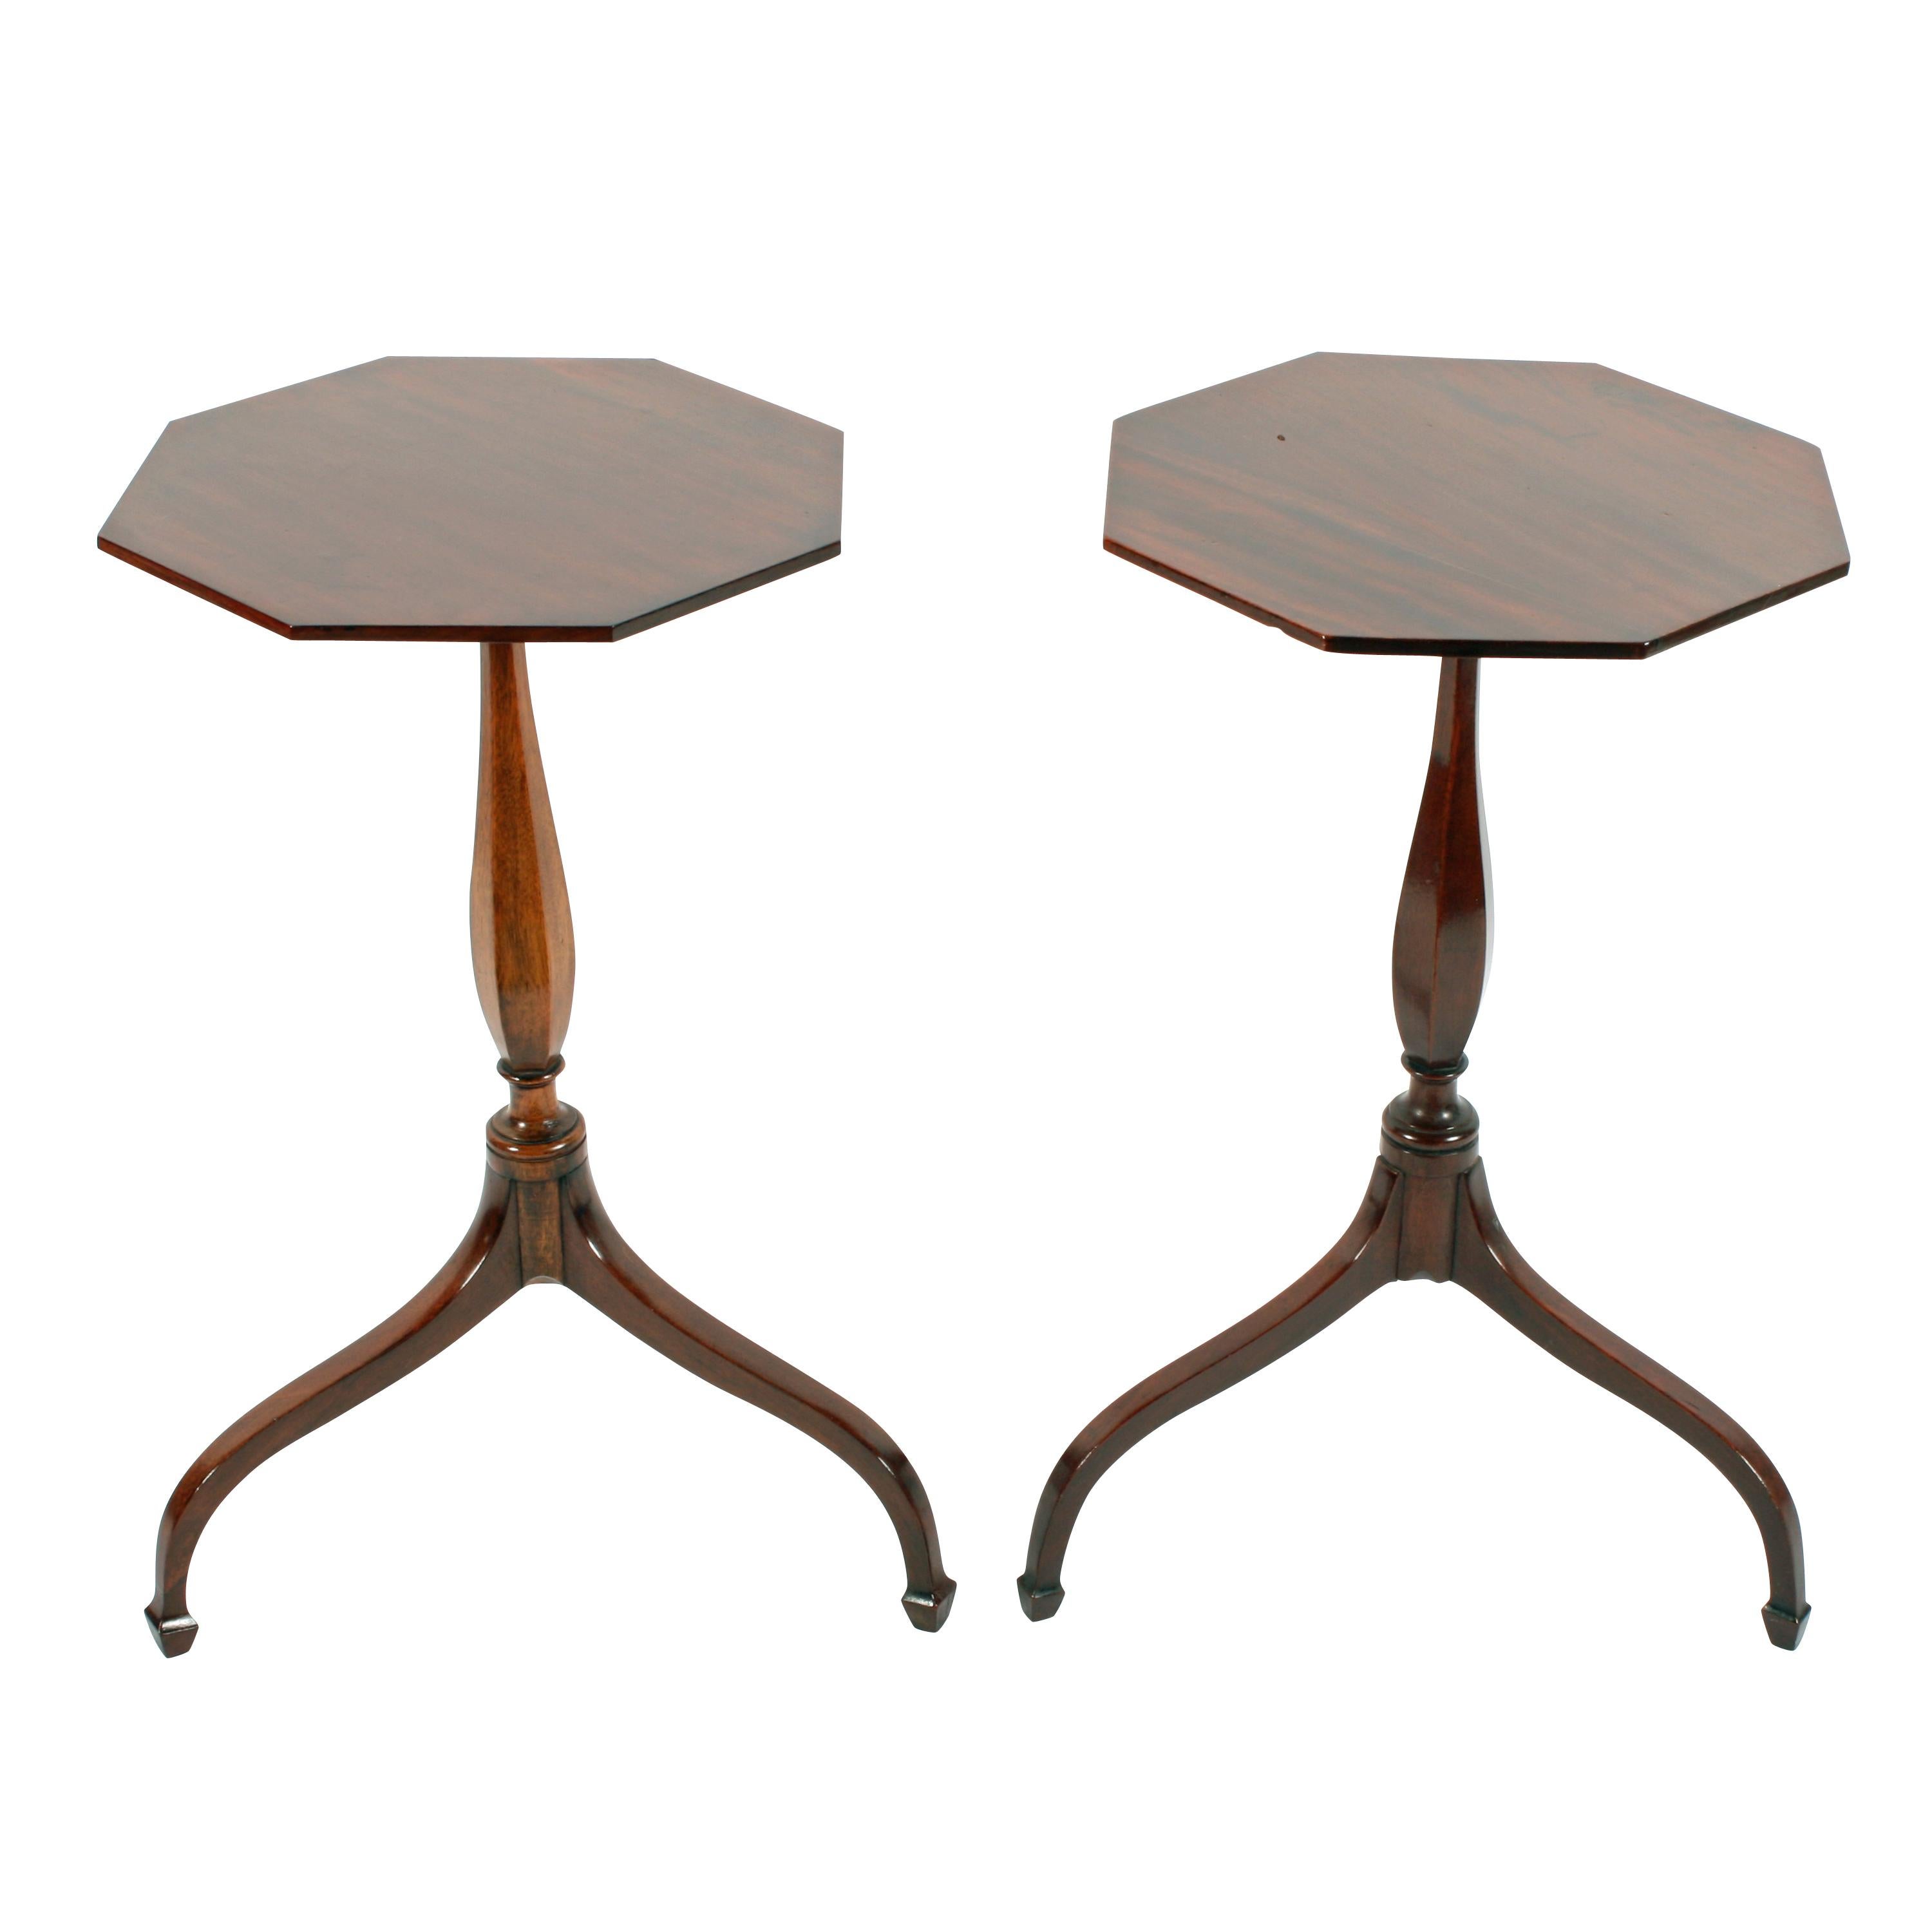 A pair of early 20th century Regency style octagonal top mahogany kettle stands.

The stands have a baluster shaped hexagonal stem and an umbrella tripod base.

The tips of the tripod base have squared spayed toes.

The tables are in good